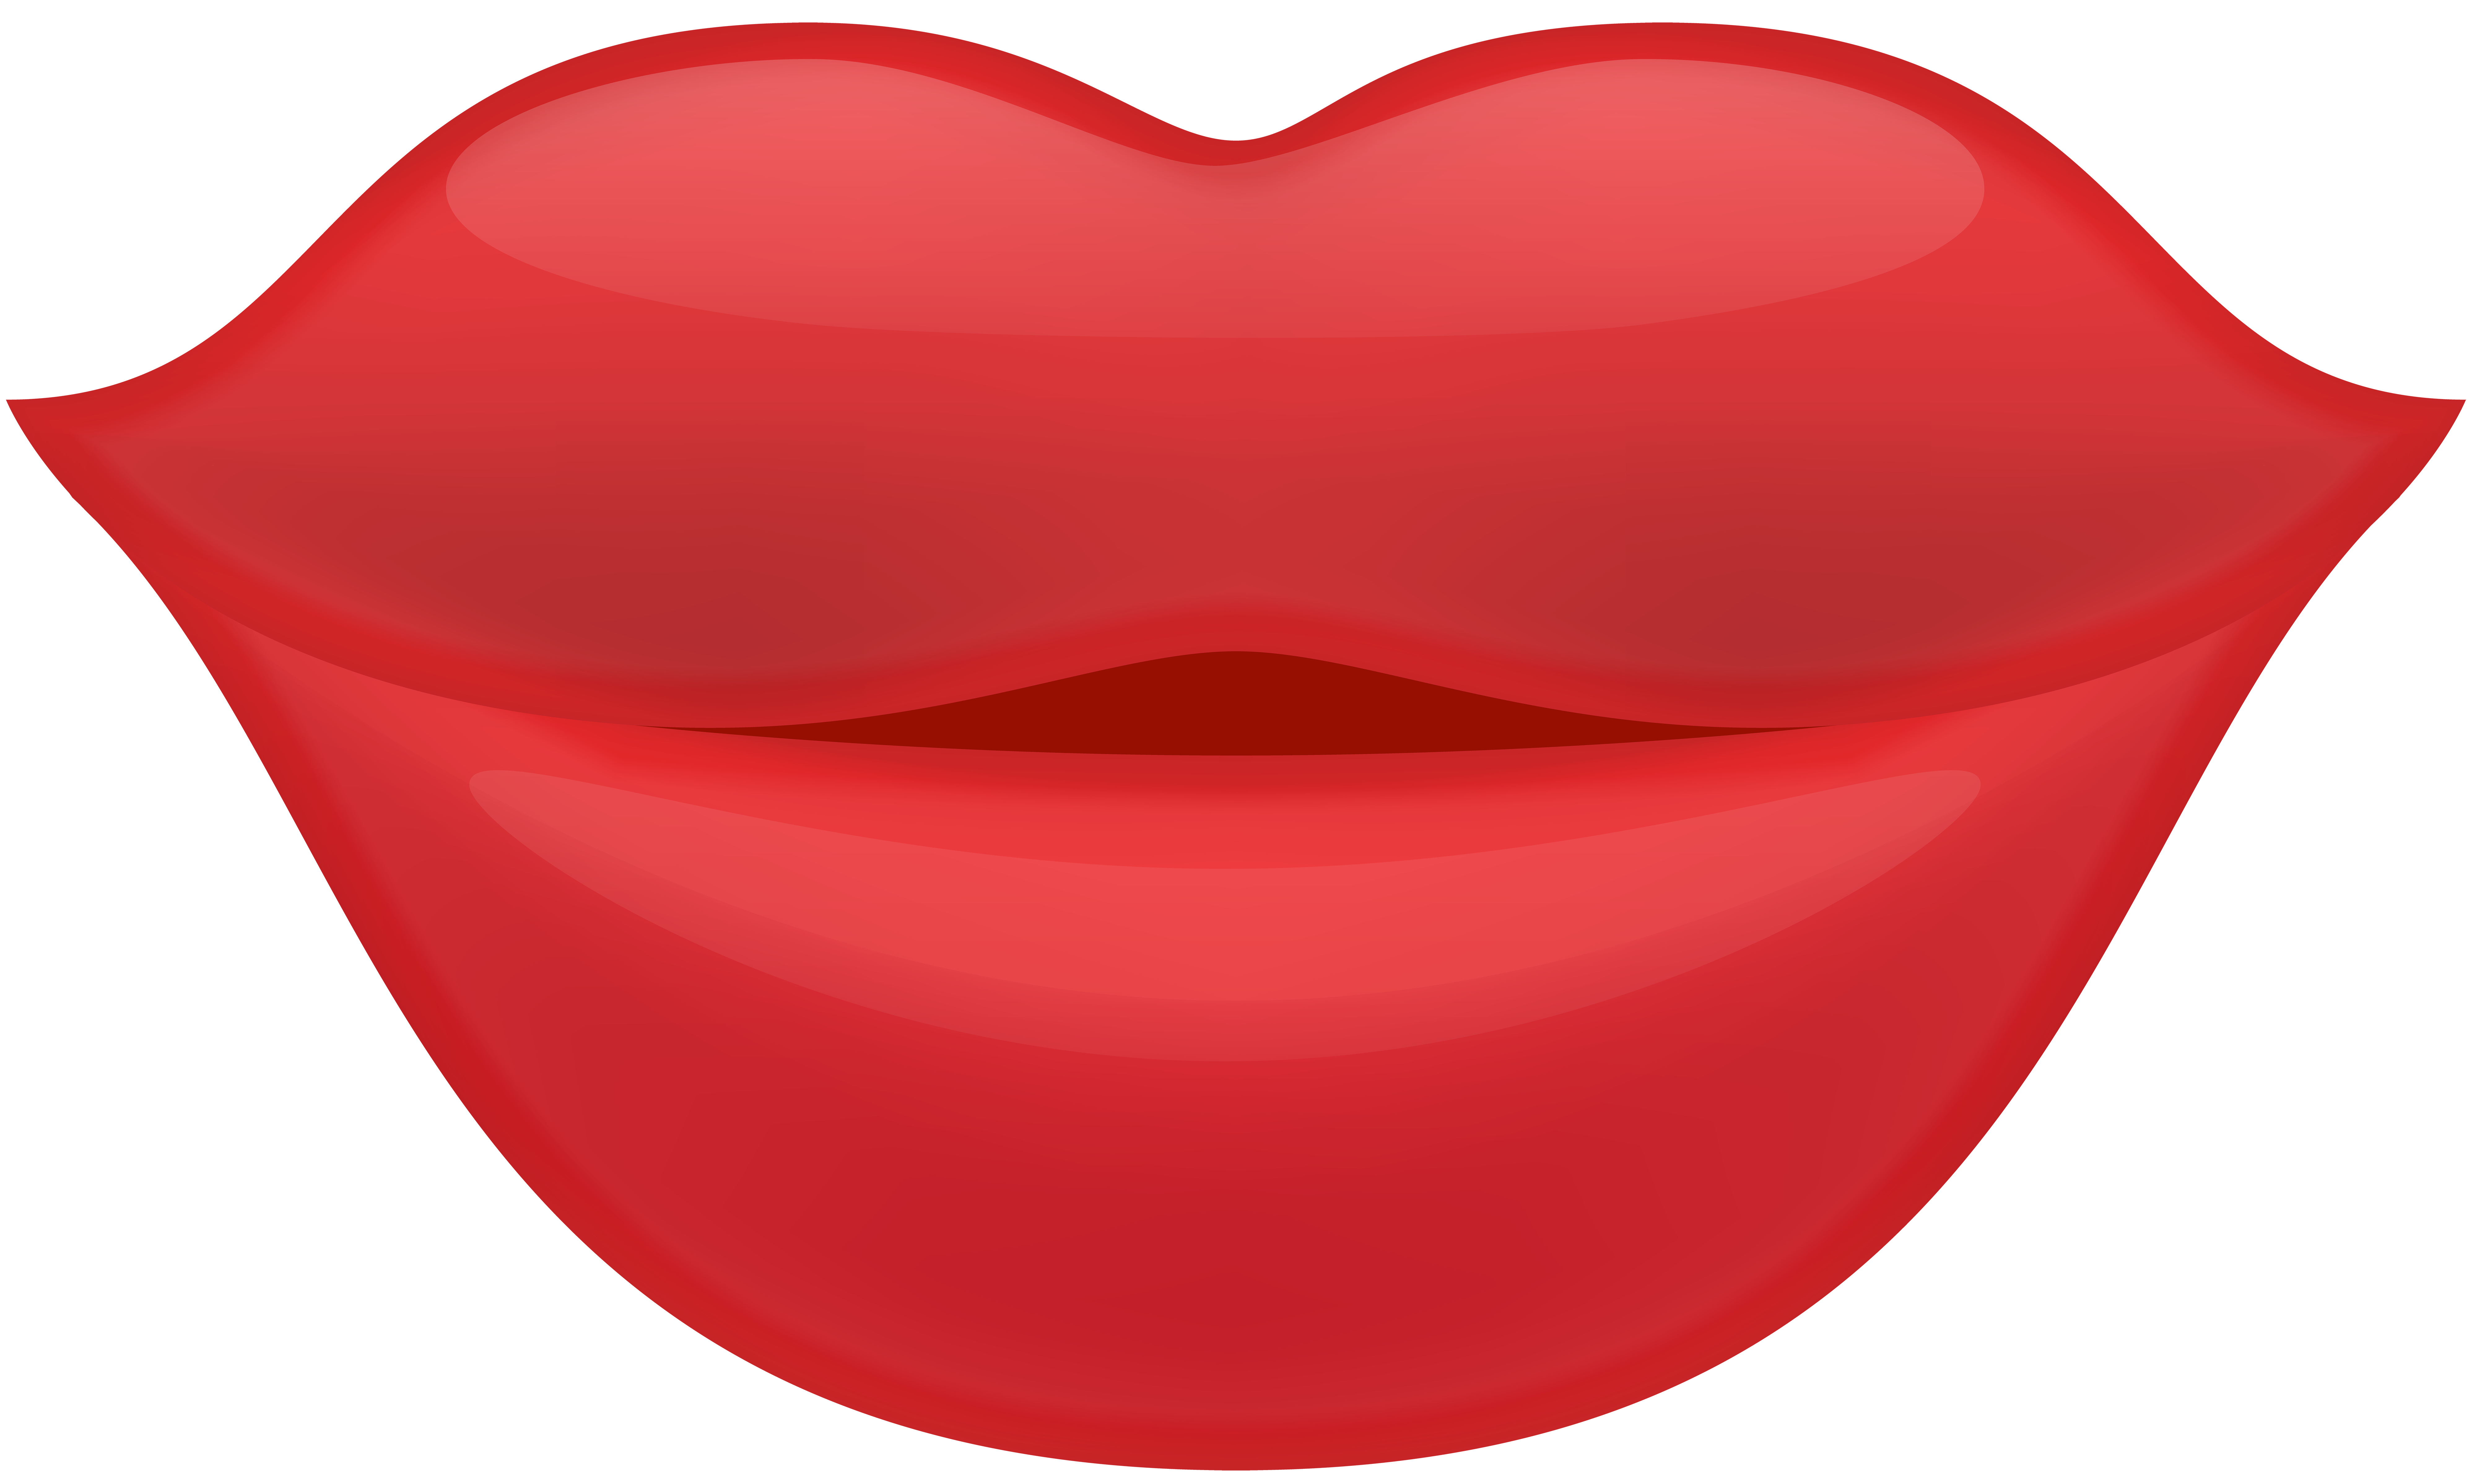 Product Design Lip Heart Bright Red Lips Png Download 80004793